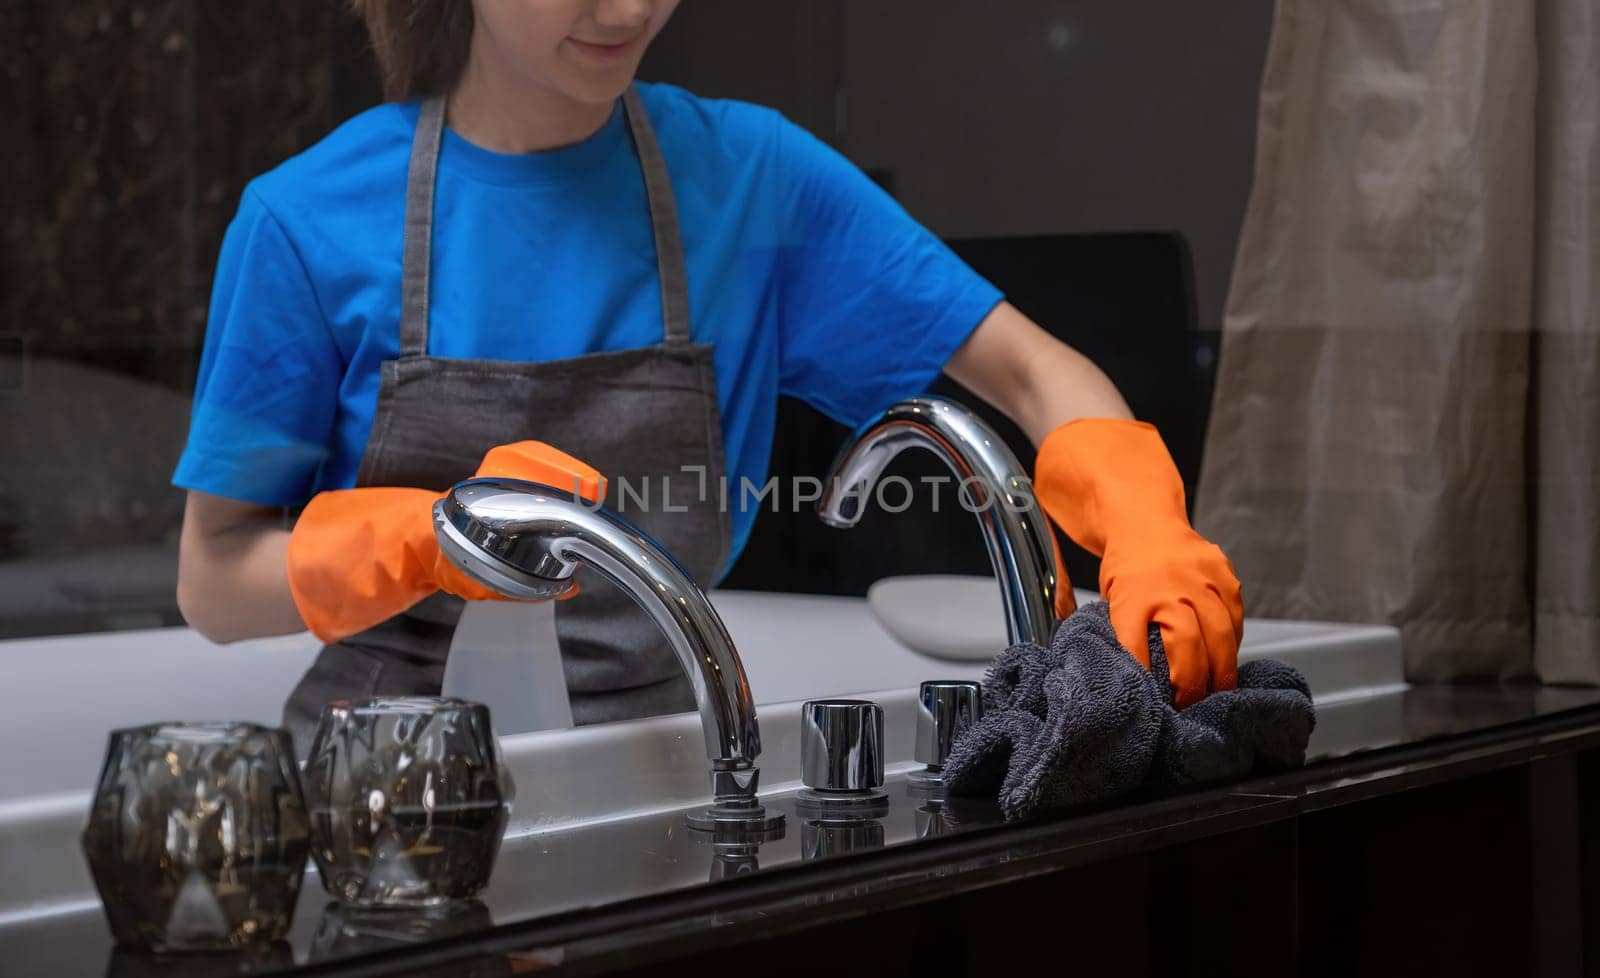 Housekeeper cleaning bathroom sink with orange gloves. Concept of cleanliness and hygiene.